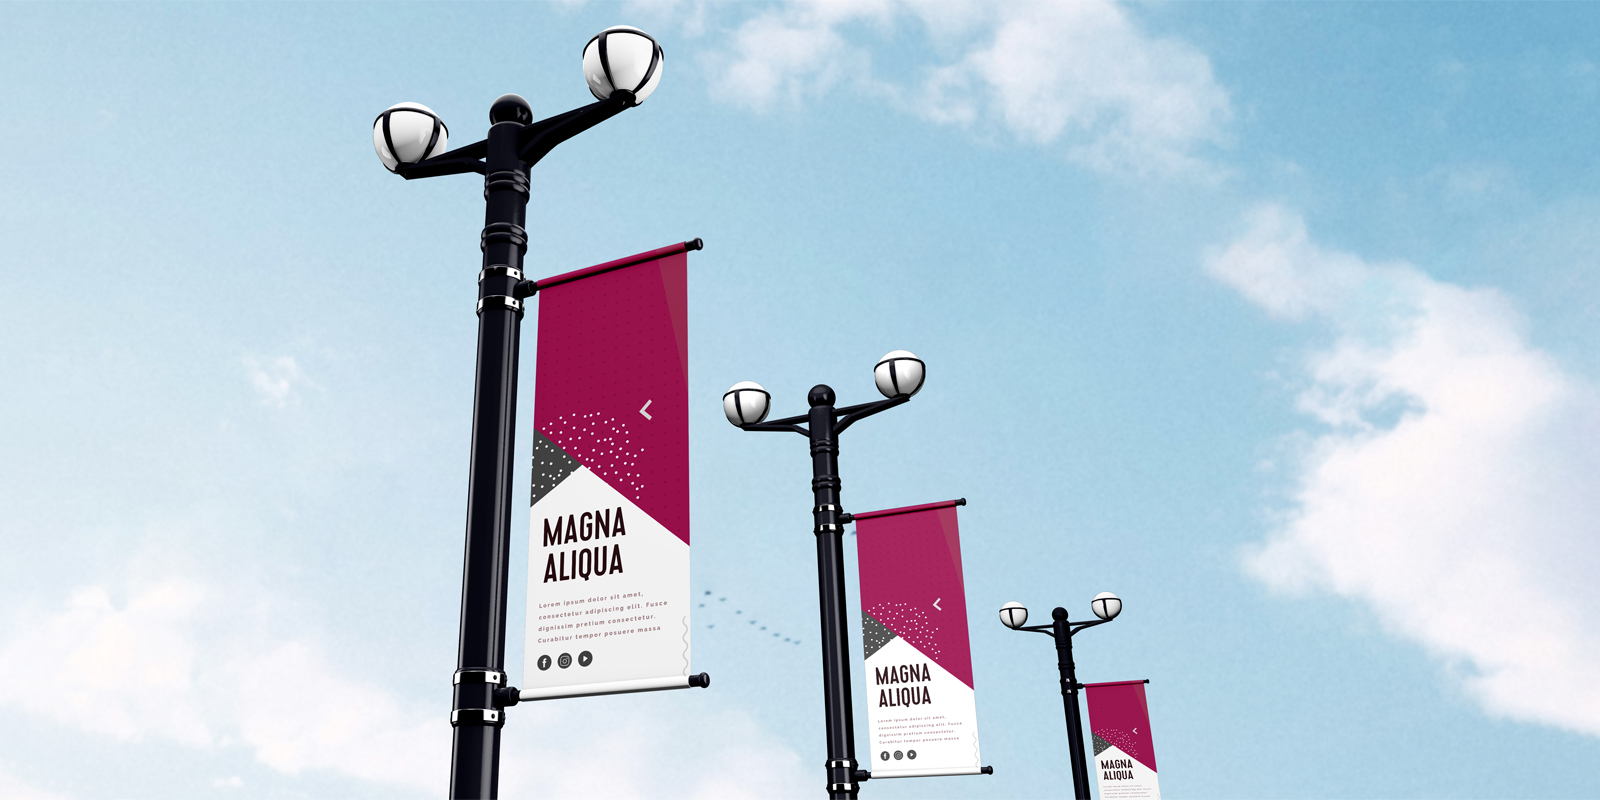 Pole banners in Rockhampton - Print with Pagerr